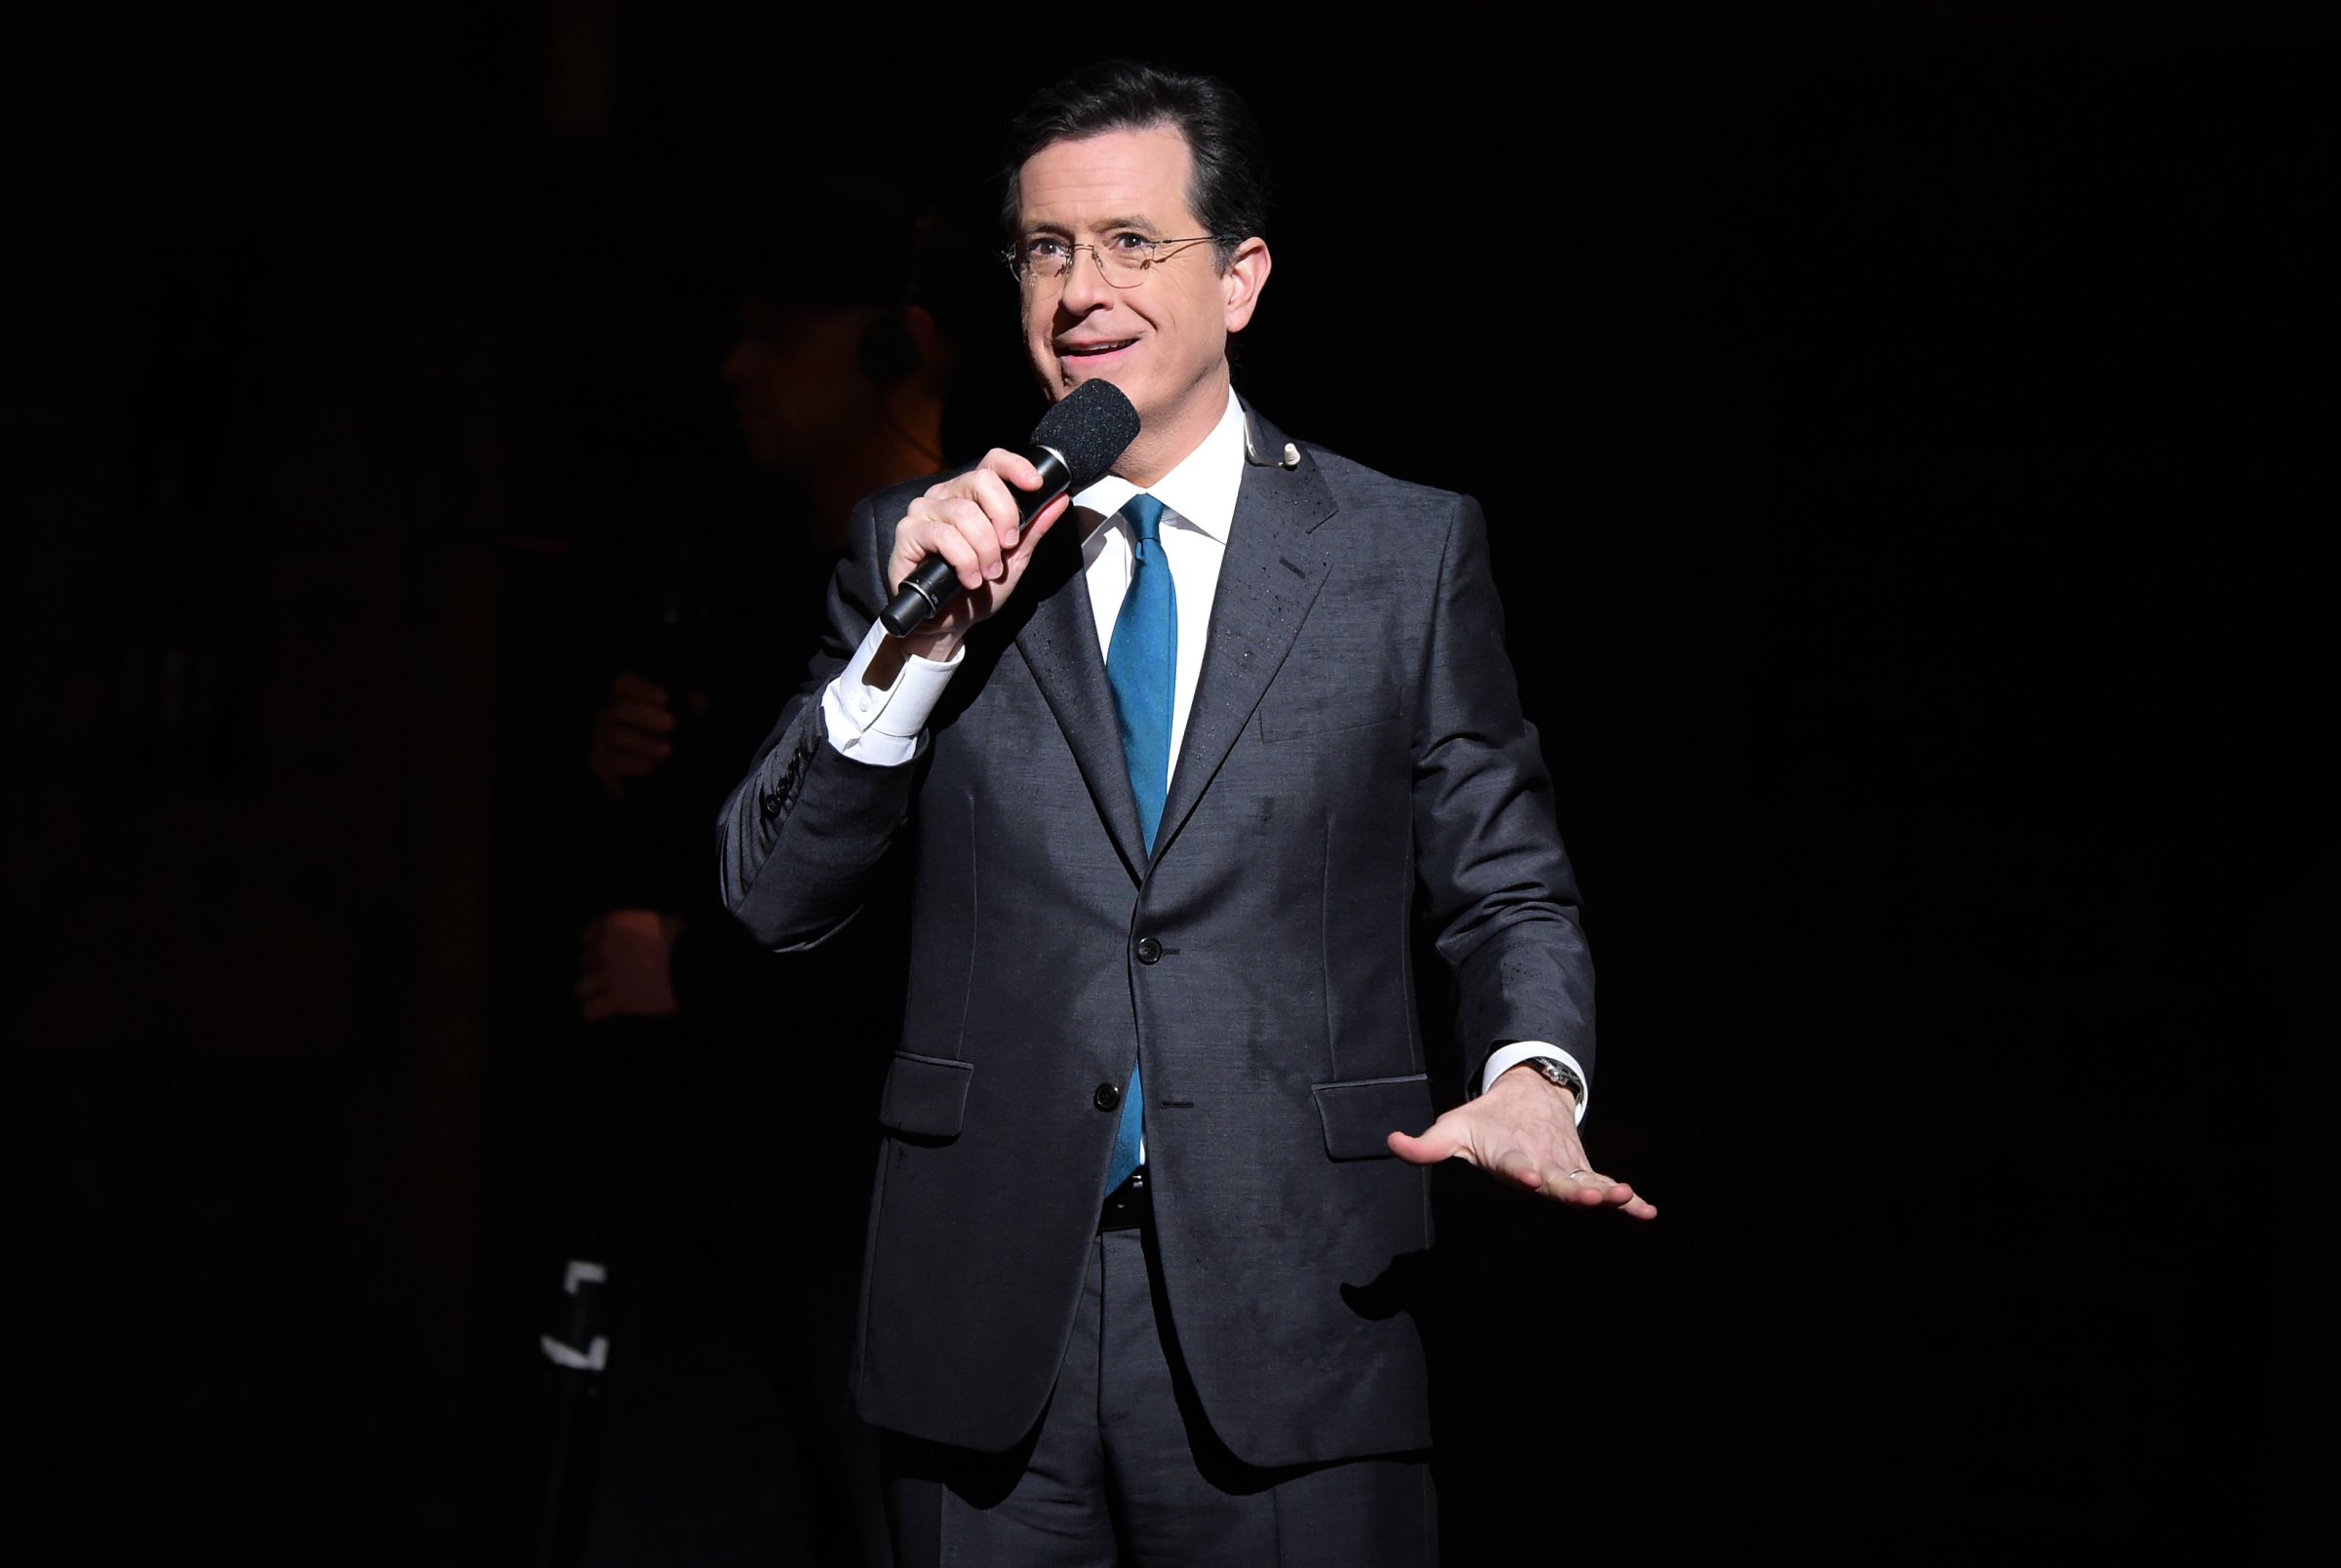 TV Host, comedian Stephen Colbert speaks on stage prior to "Hamilton" GRAMMY performance for The 58th GRAMMY Awards at Richard Rodgers Theater on February 15, 2016 in New York City.